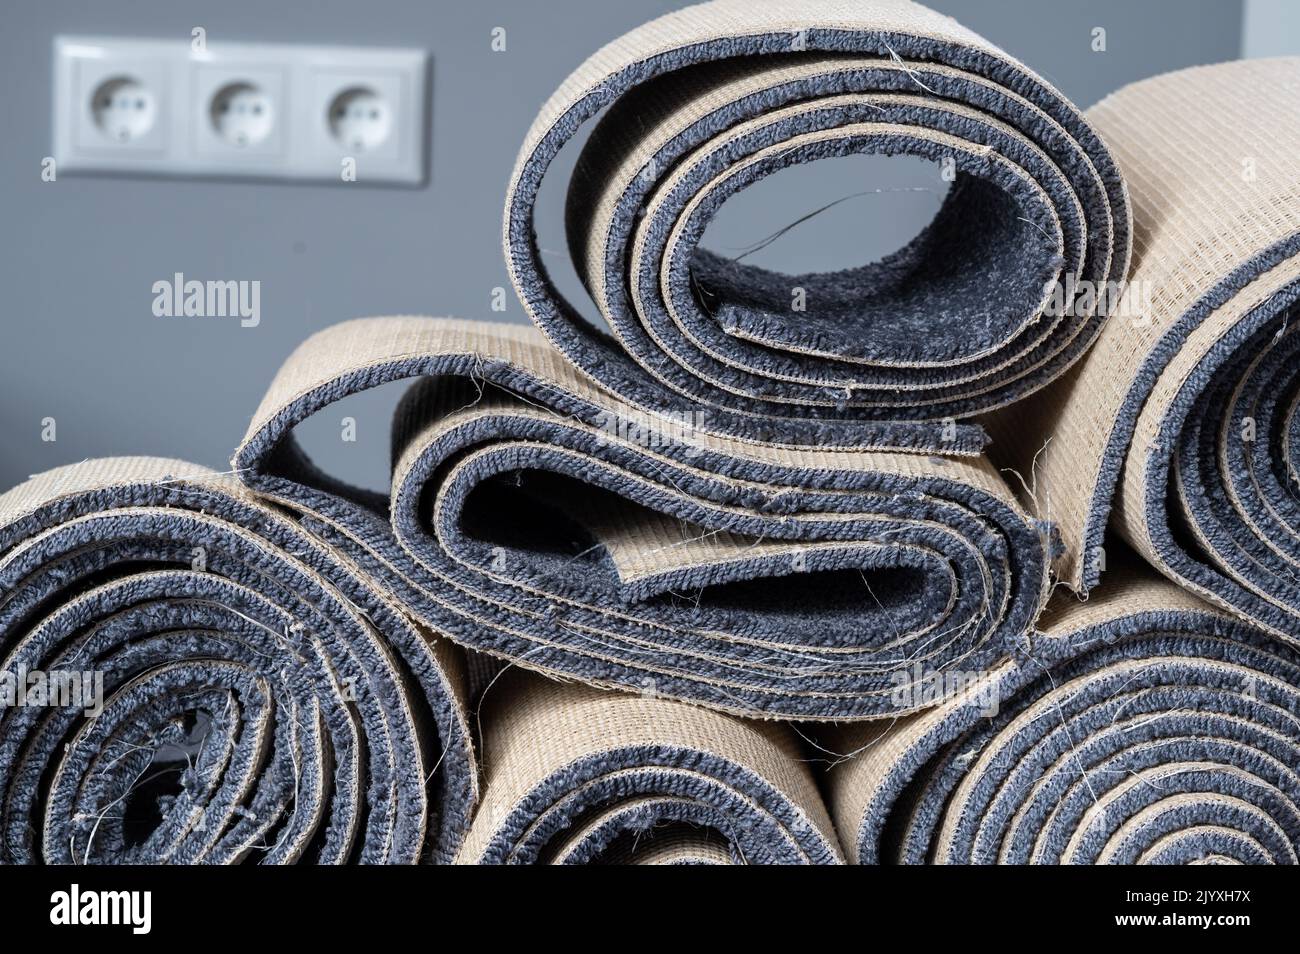 Stacked old carpet rolls in a grey room. Stock Photo